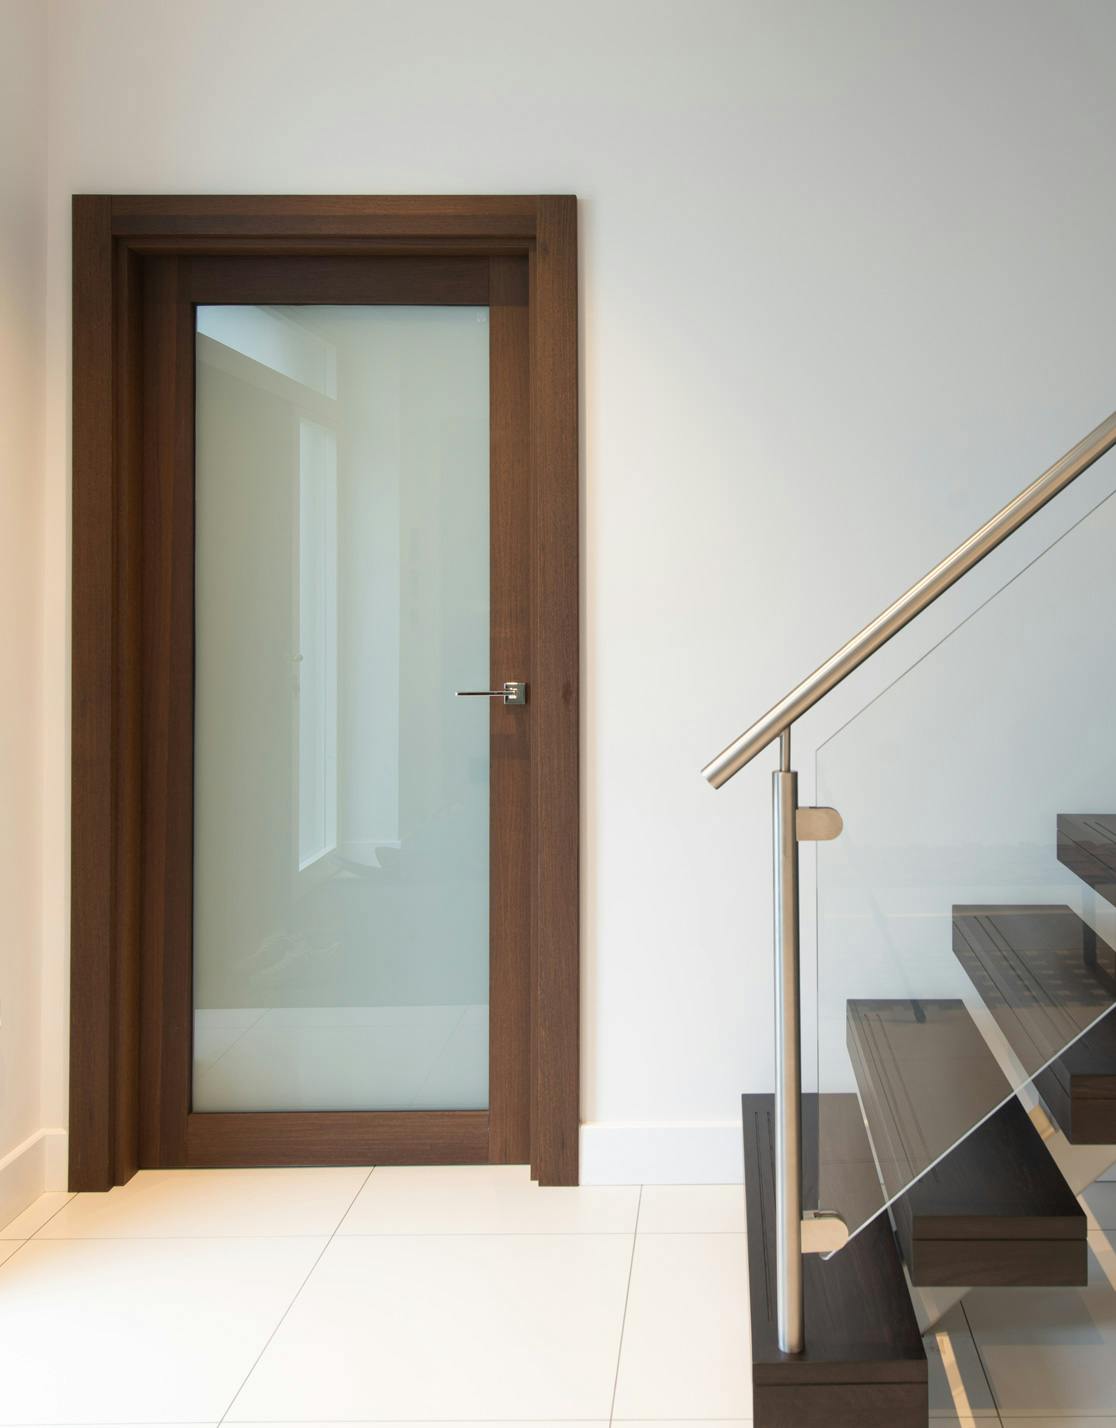 Contemporary hallway with Gio, satin glazed, single leaf door in wenge finish, made by Deuren.